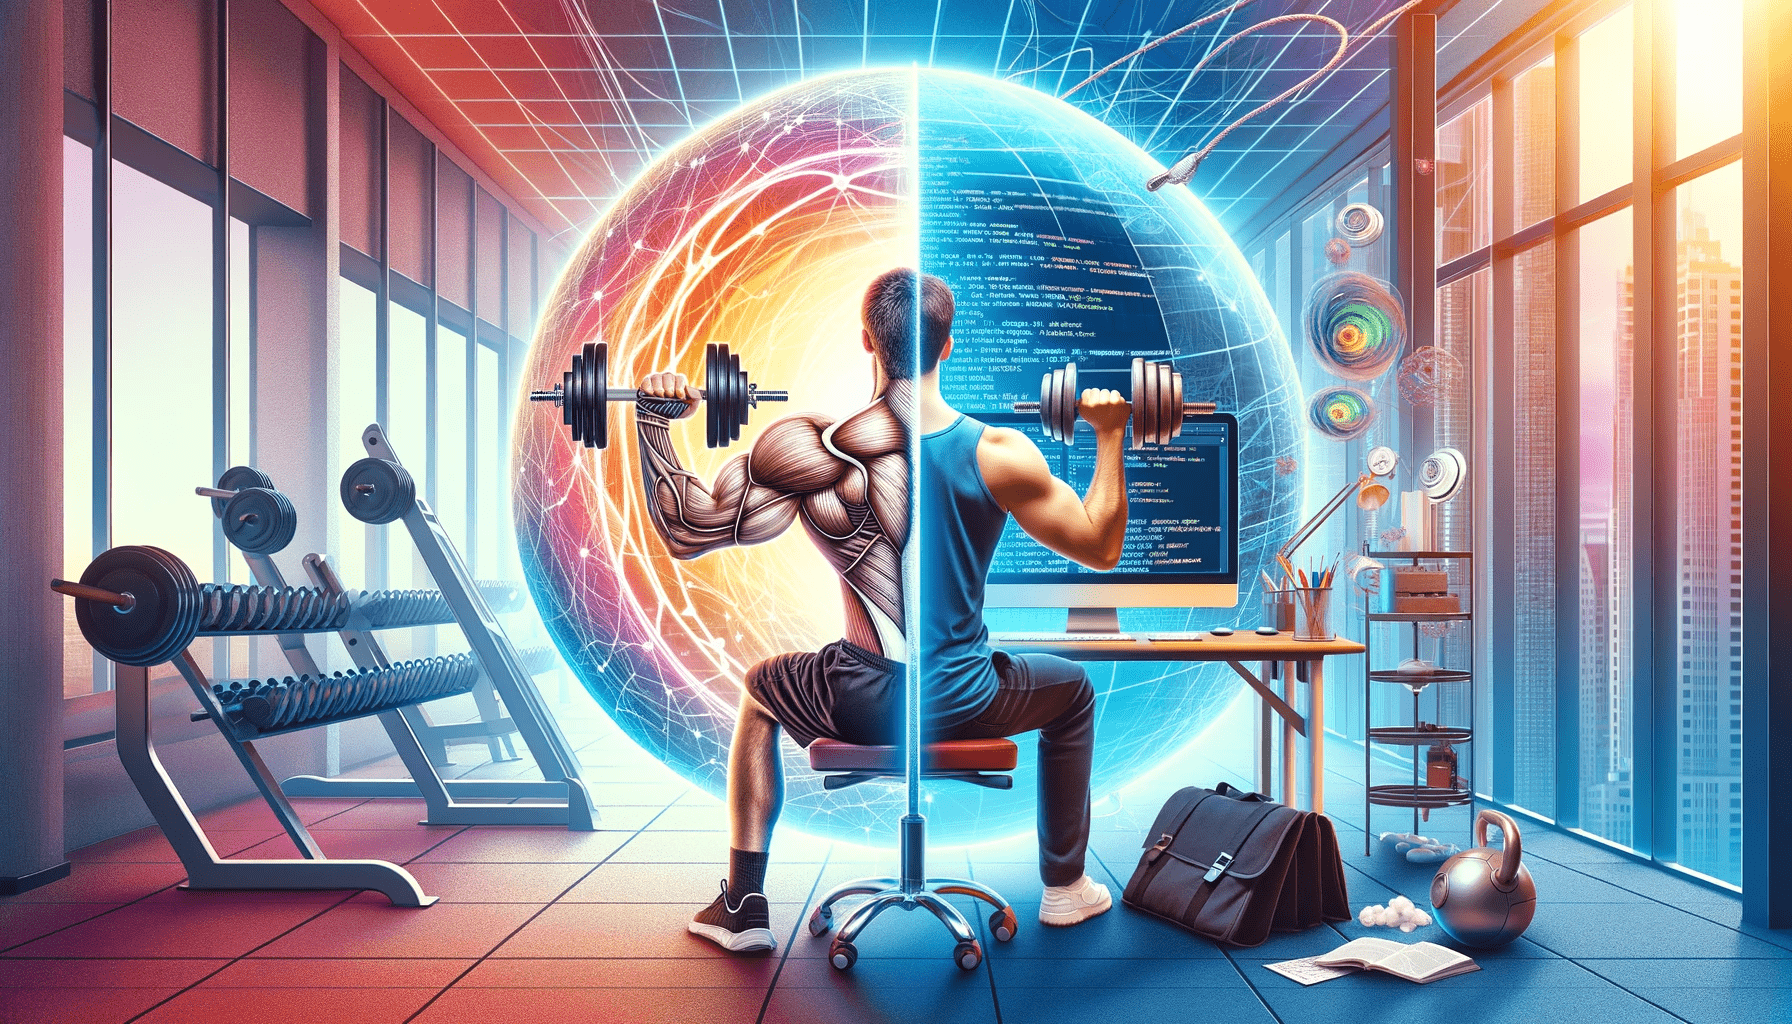 Back workout and Backend codes